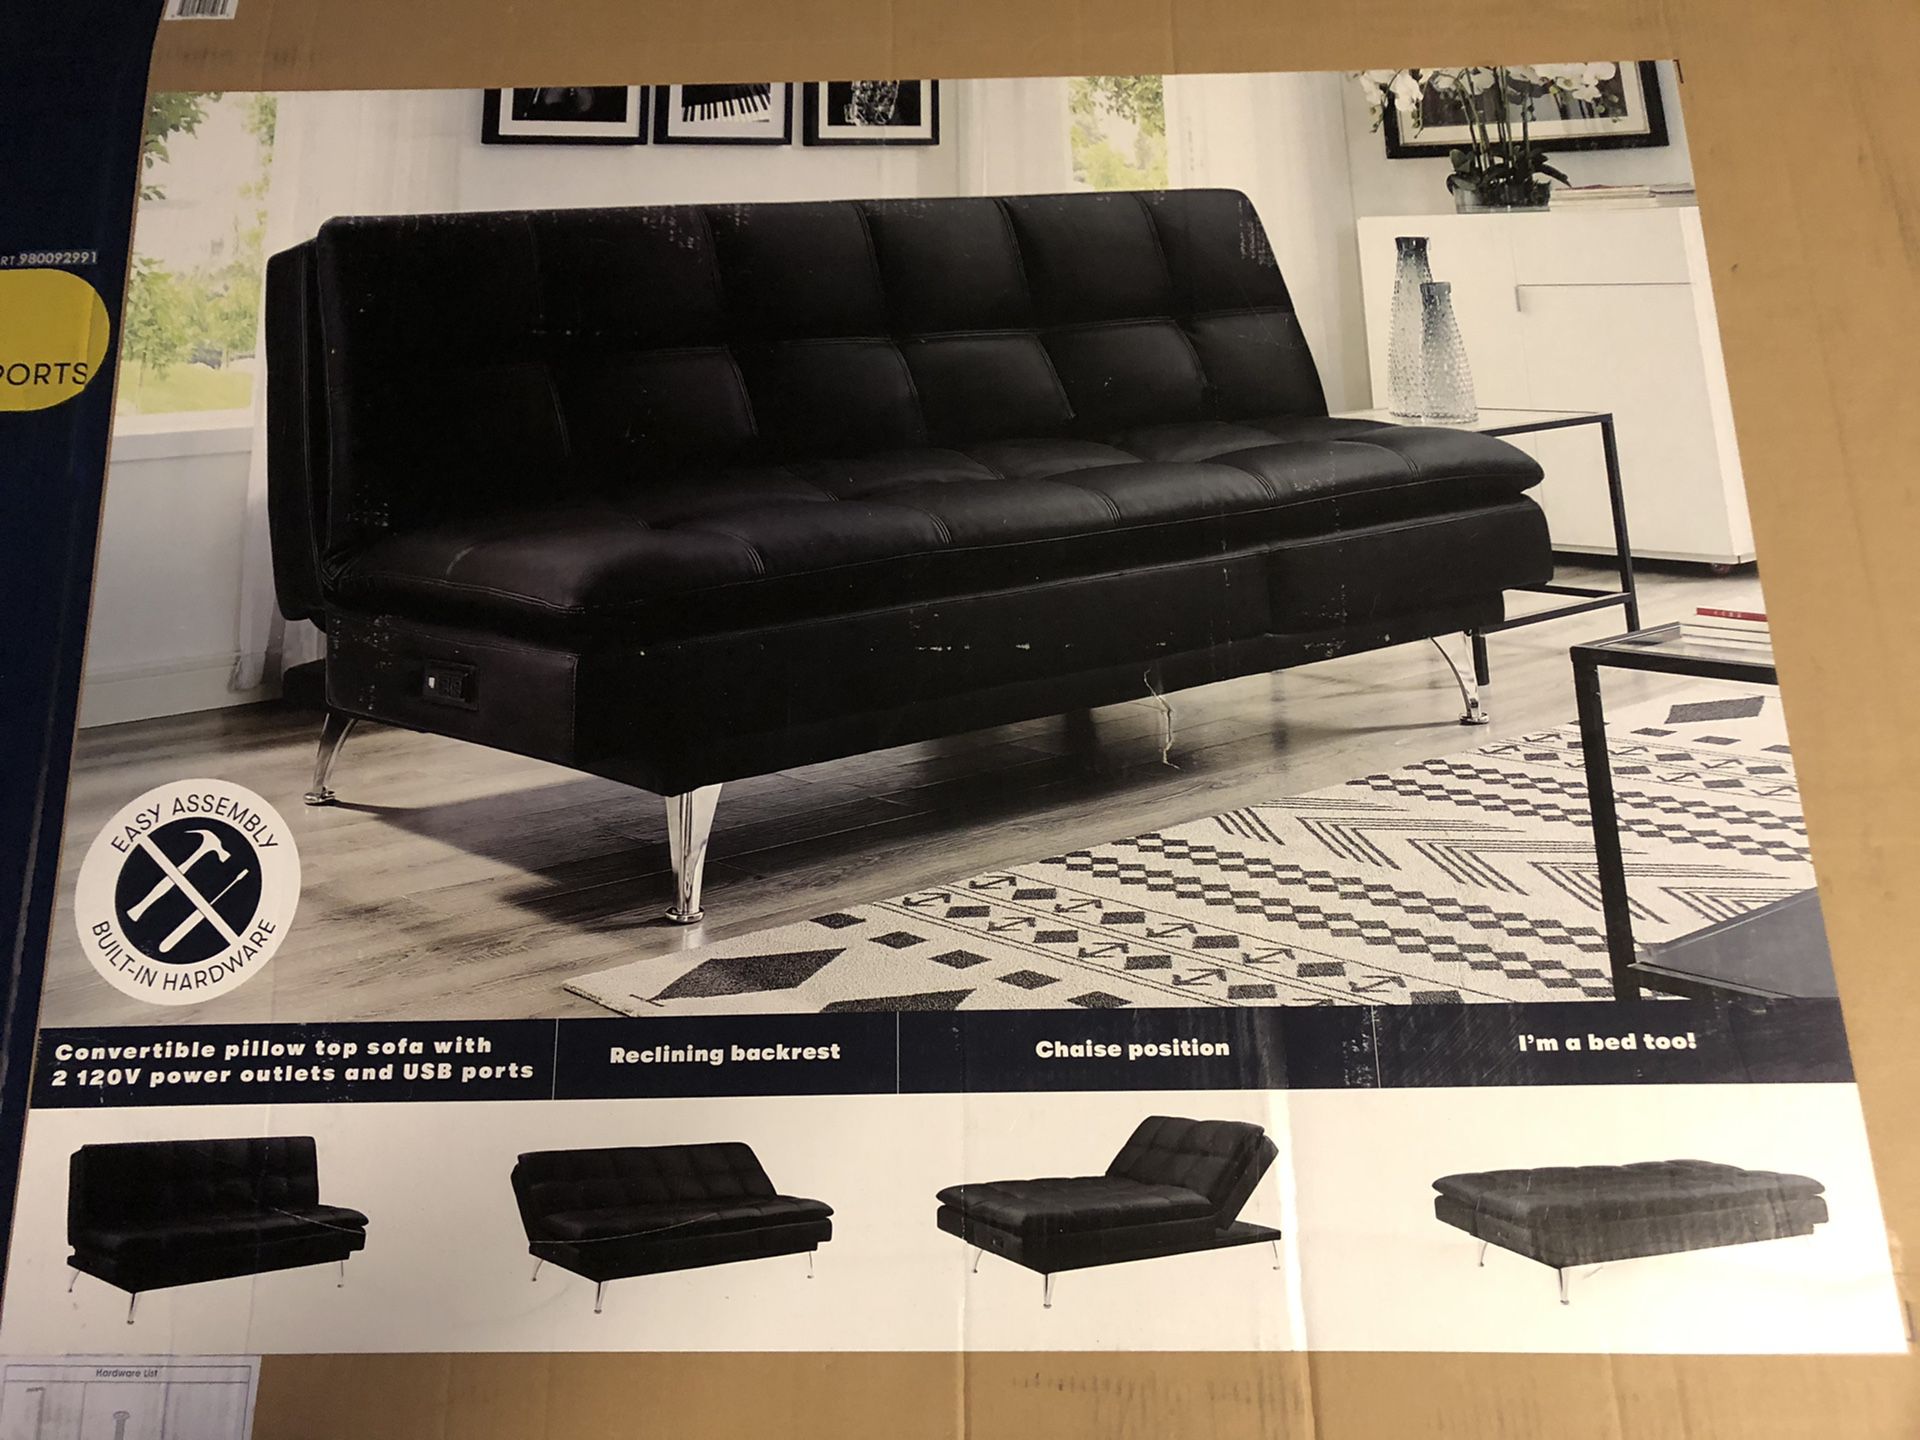 Serta Dream Morgan Convertible Top Sofa Whit 2 120 v Power outlets and USB Ports